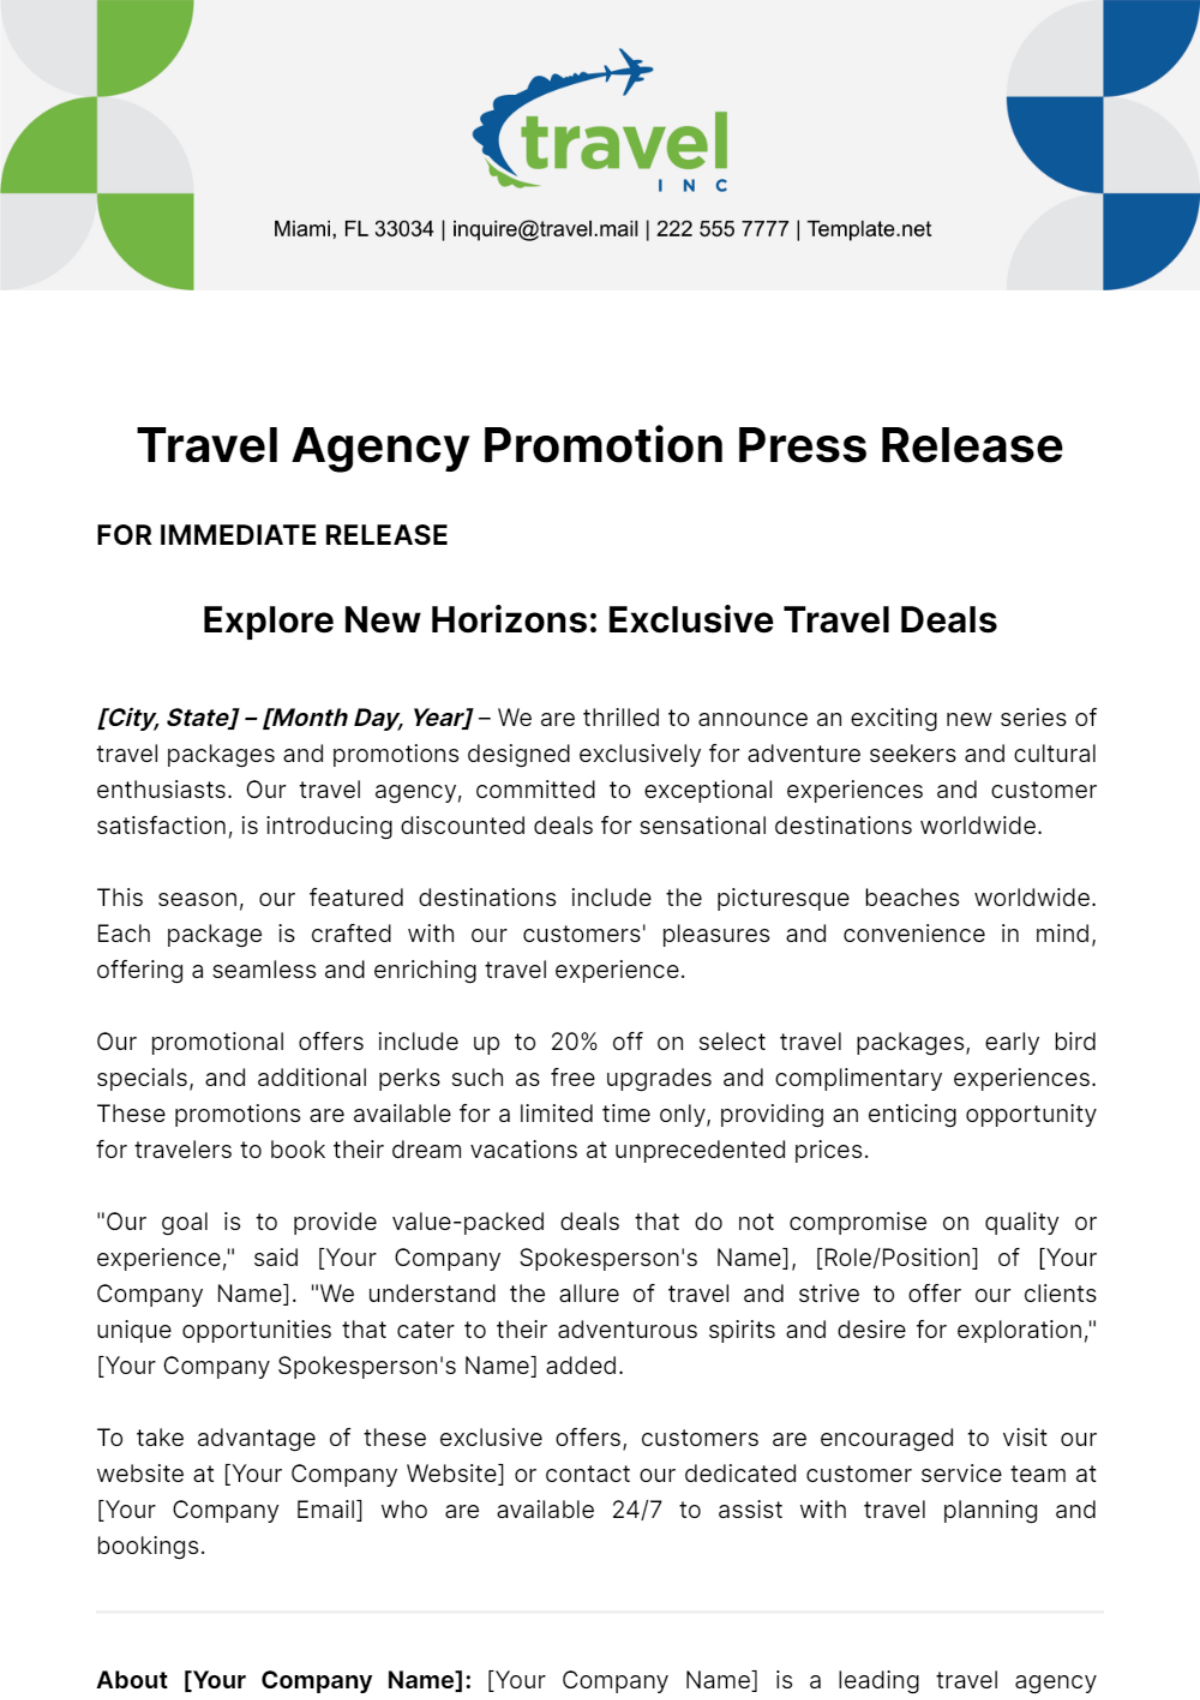 Free Travel Agency Promotion Press Release Template